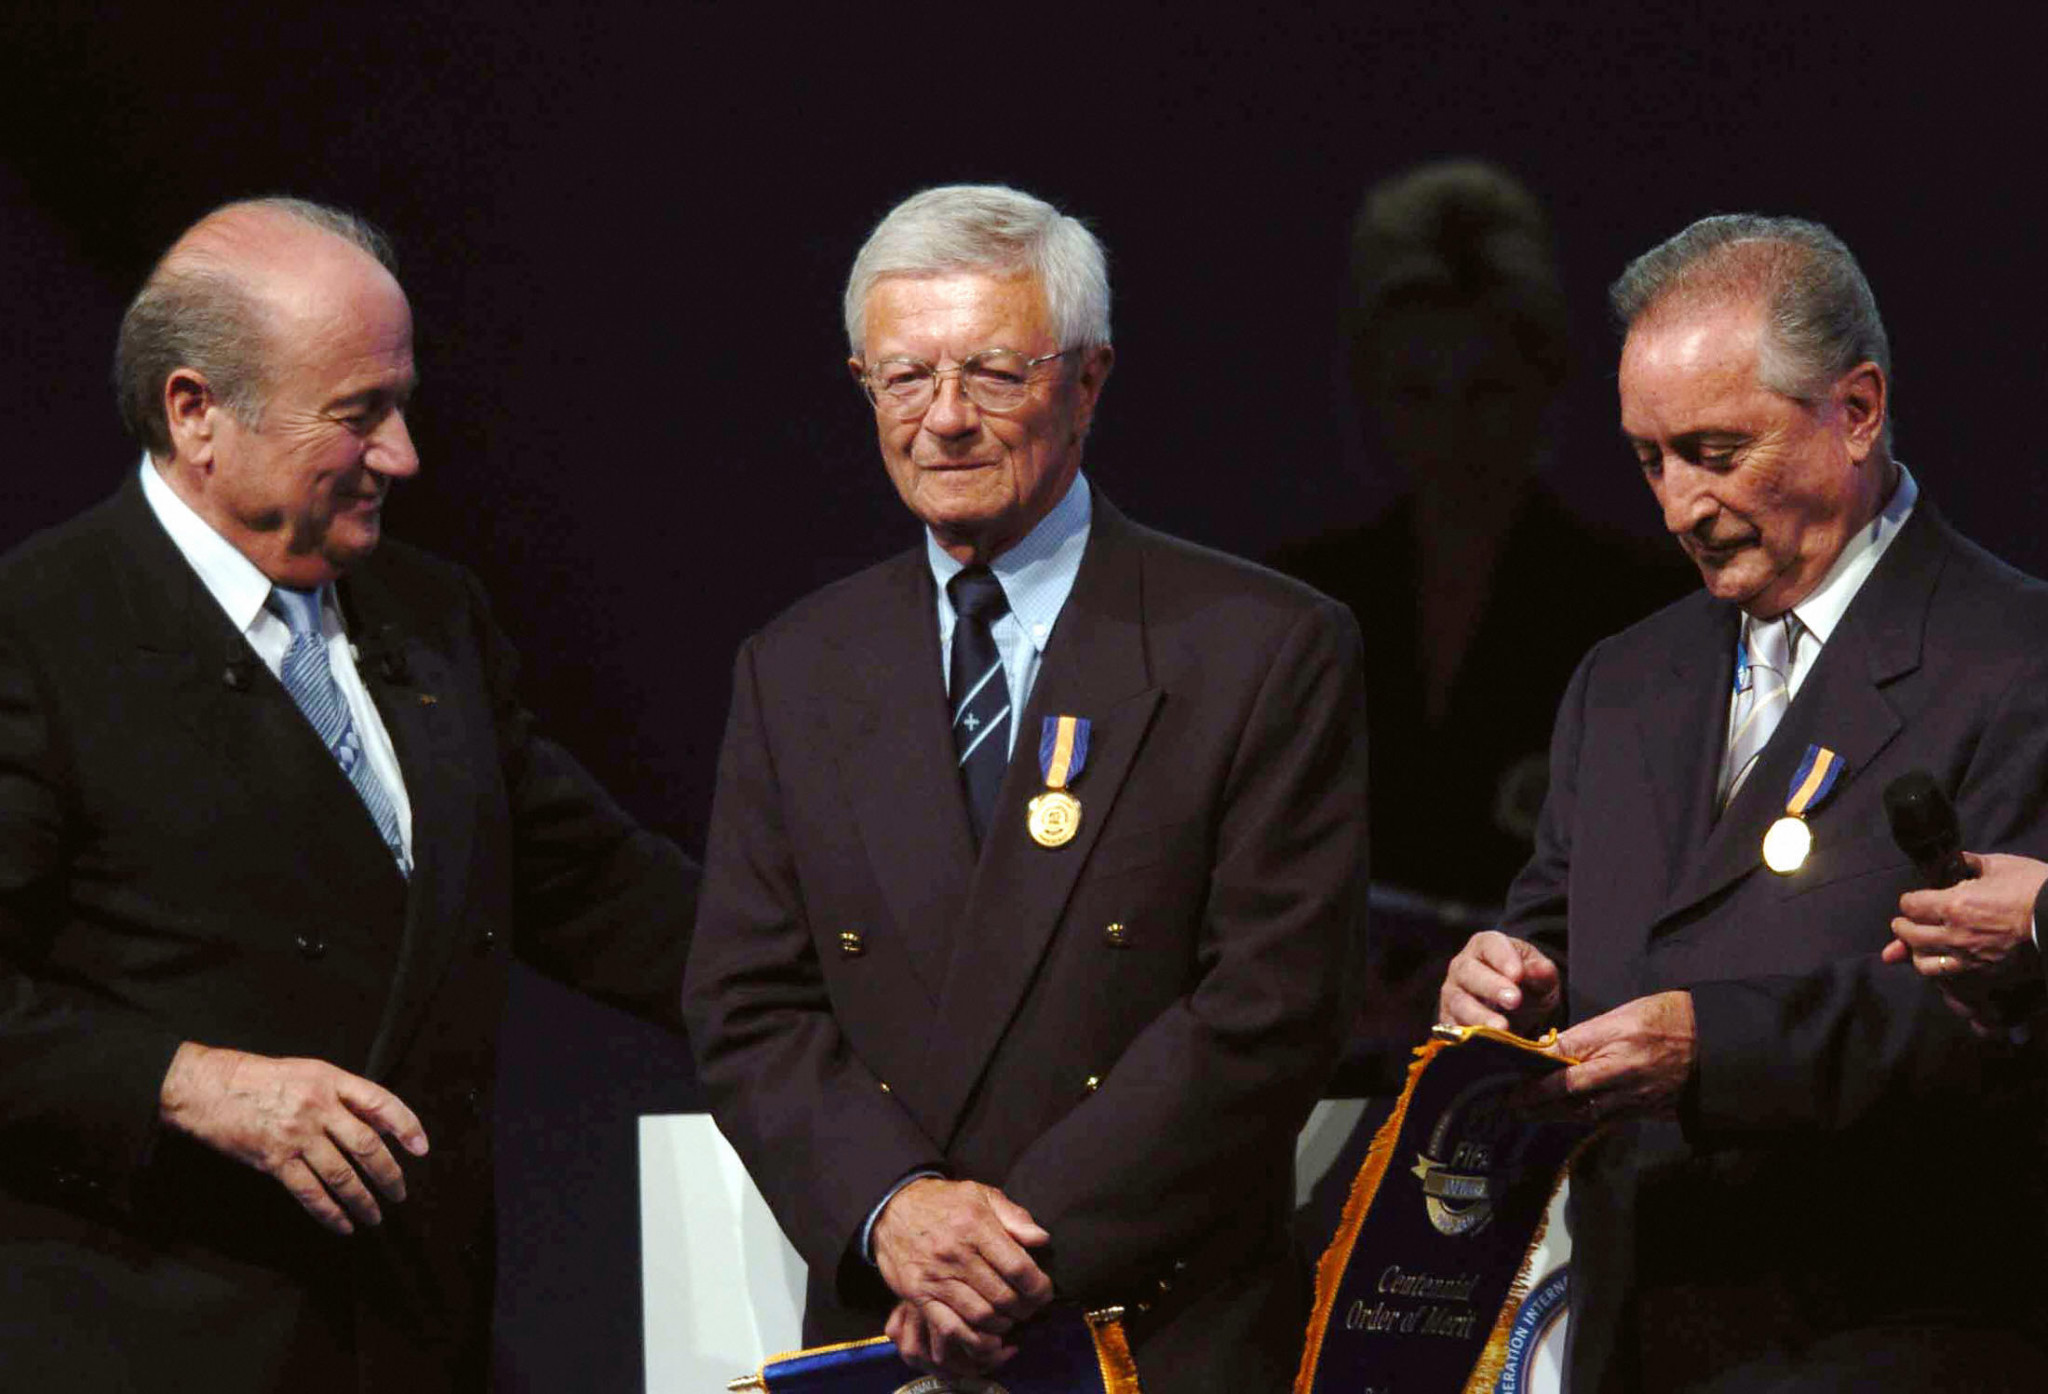 Yves Rimet, centre, was honoured by FIFA during its centenary celebrations in 2004 ©Getty Images